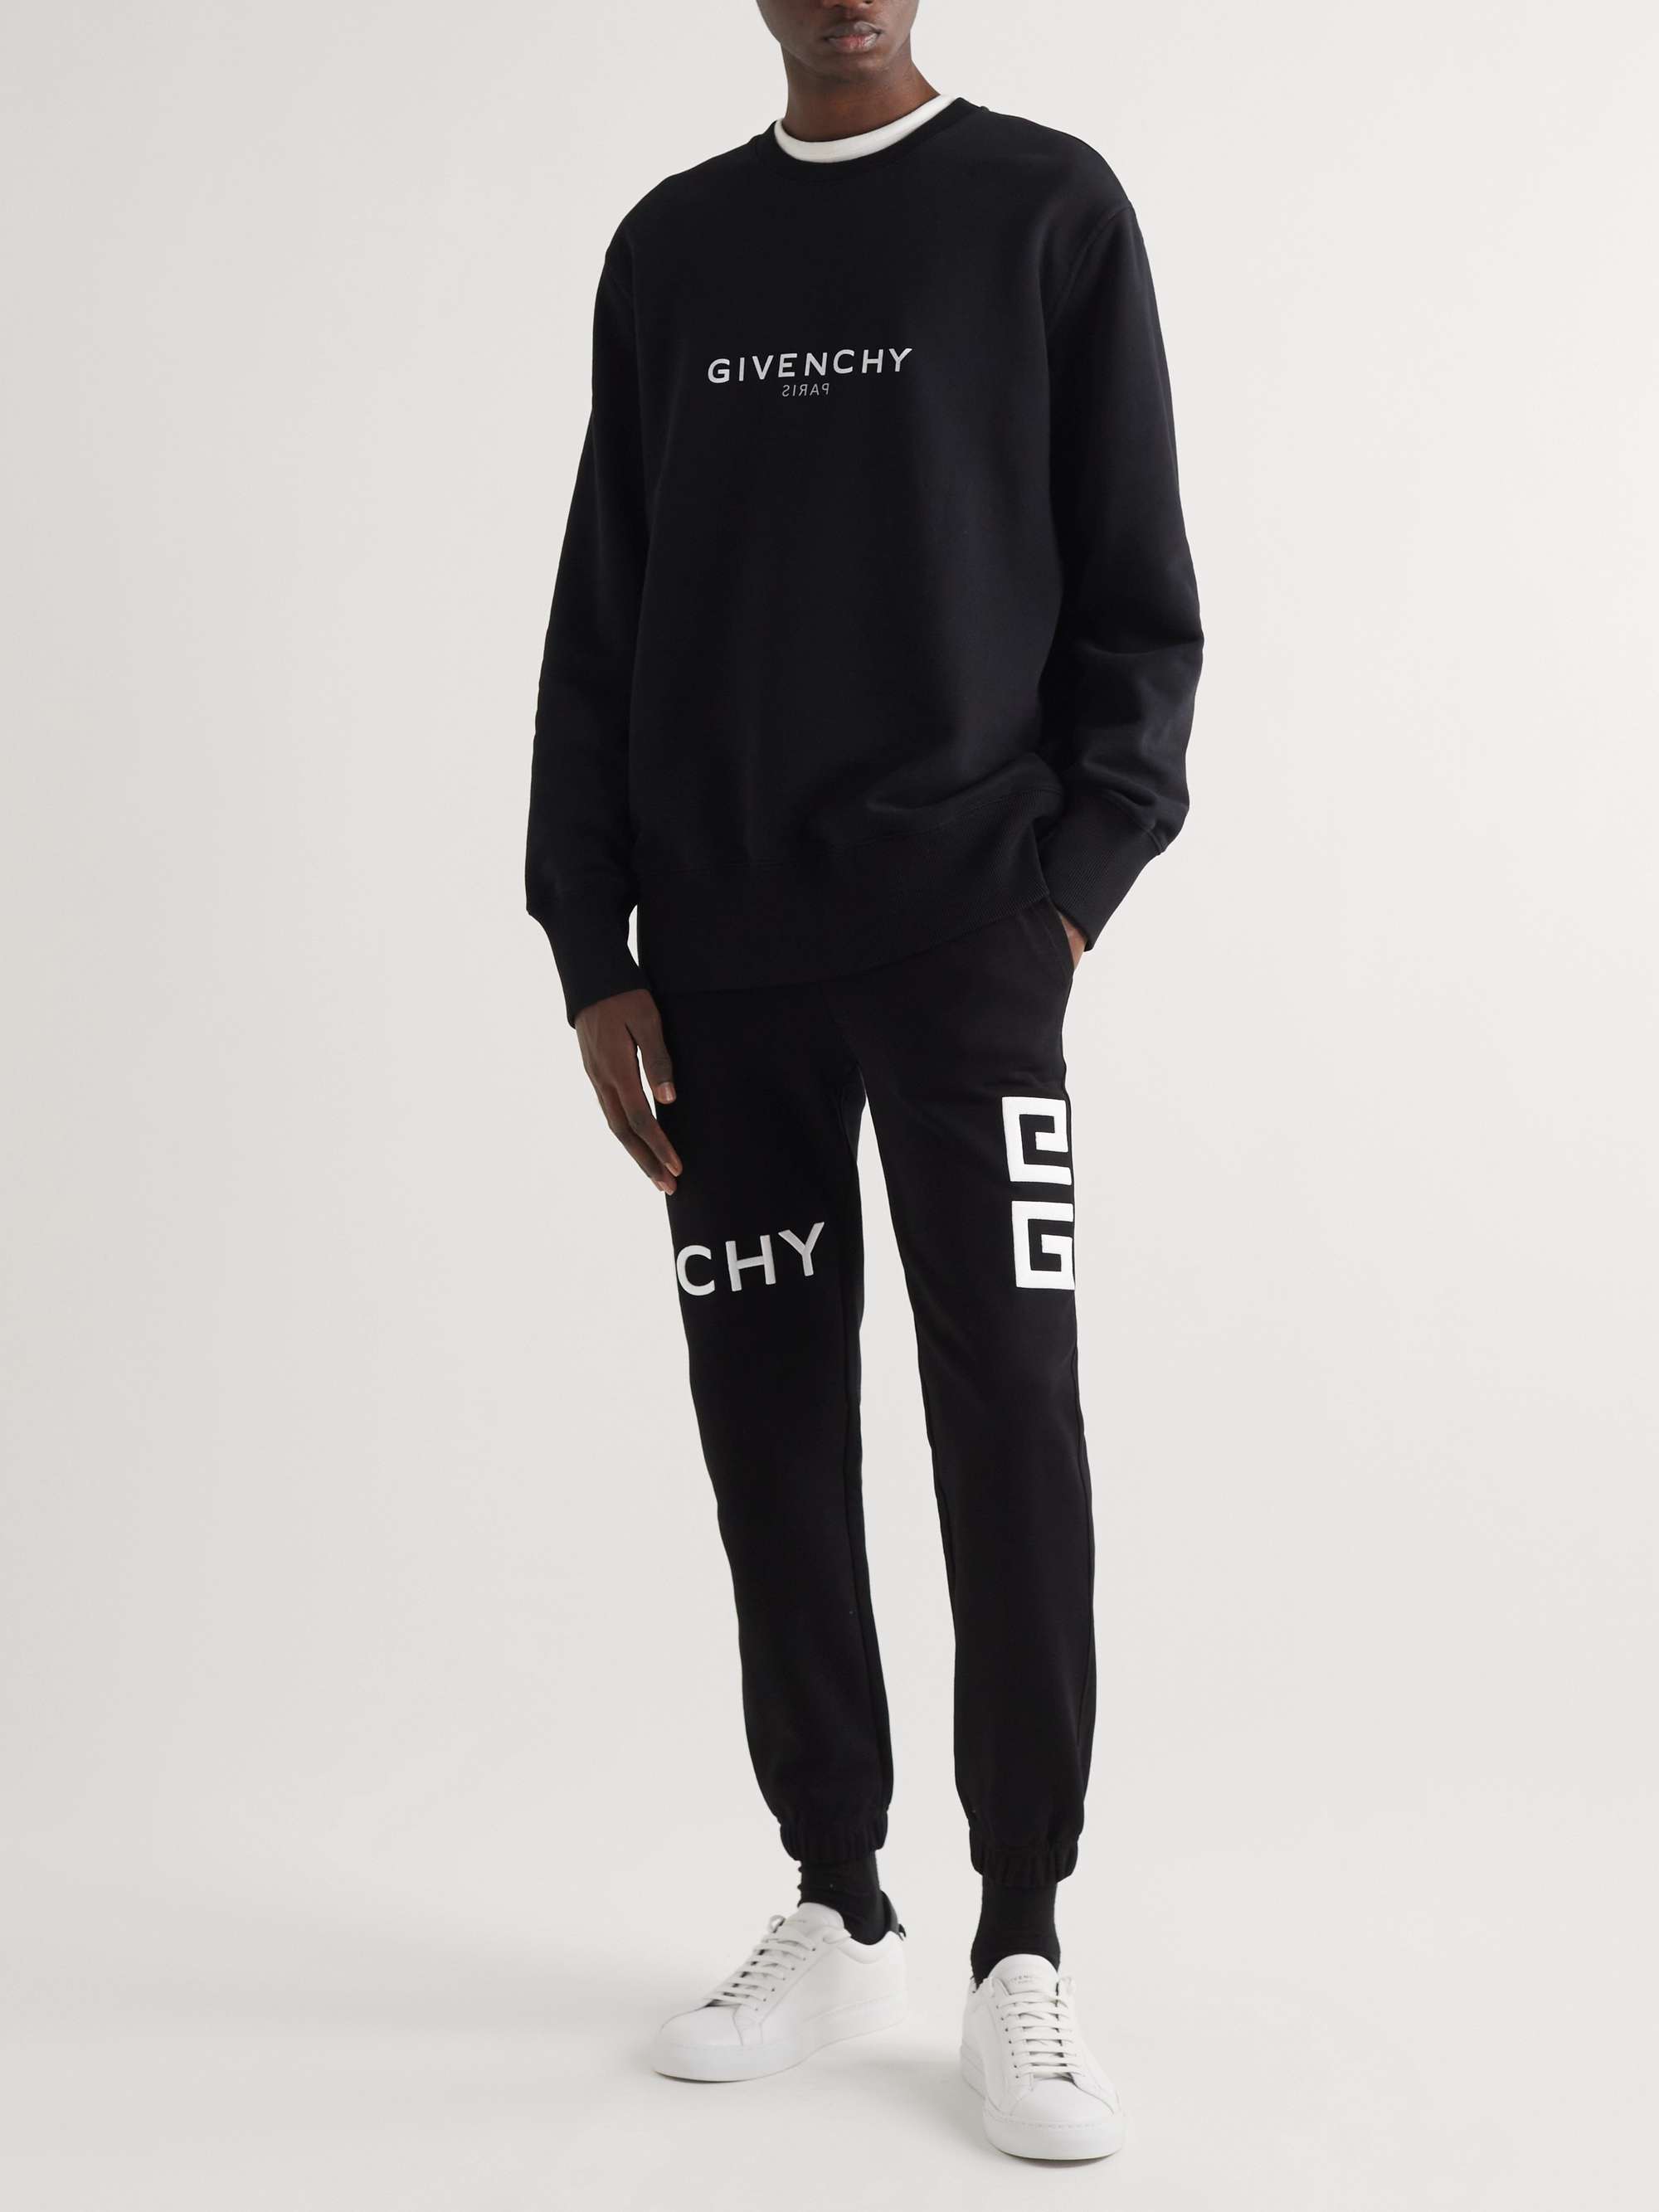 GIVENCHY Slim-Fit Logo-Embroidered Cotton-Jersey Sweatpants | MR PORTER